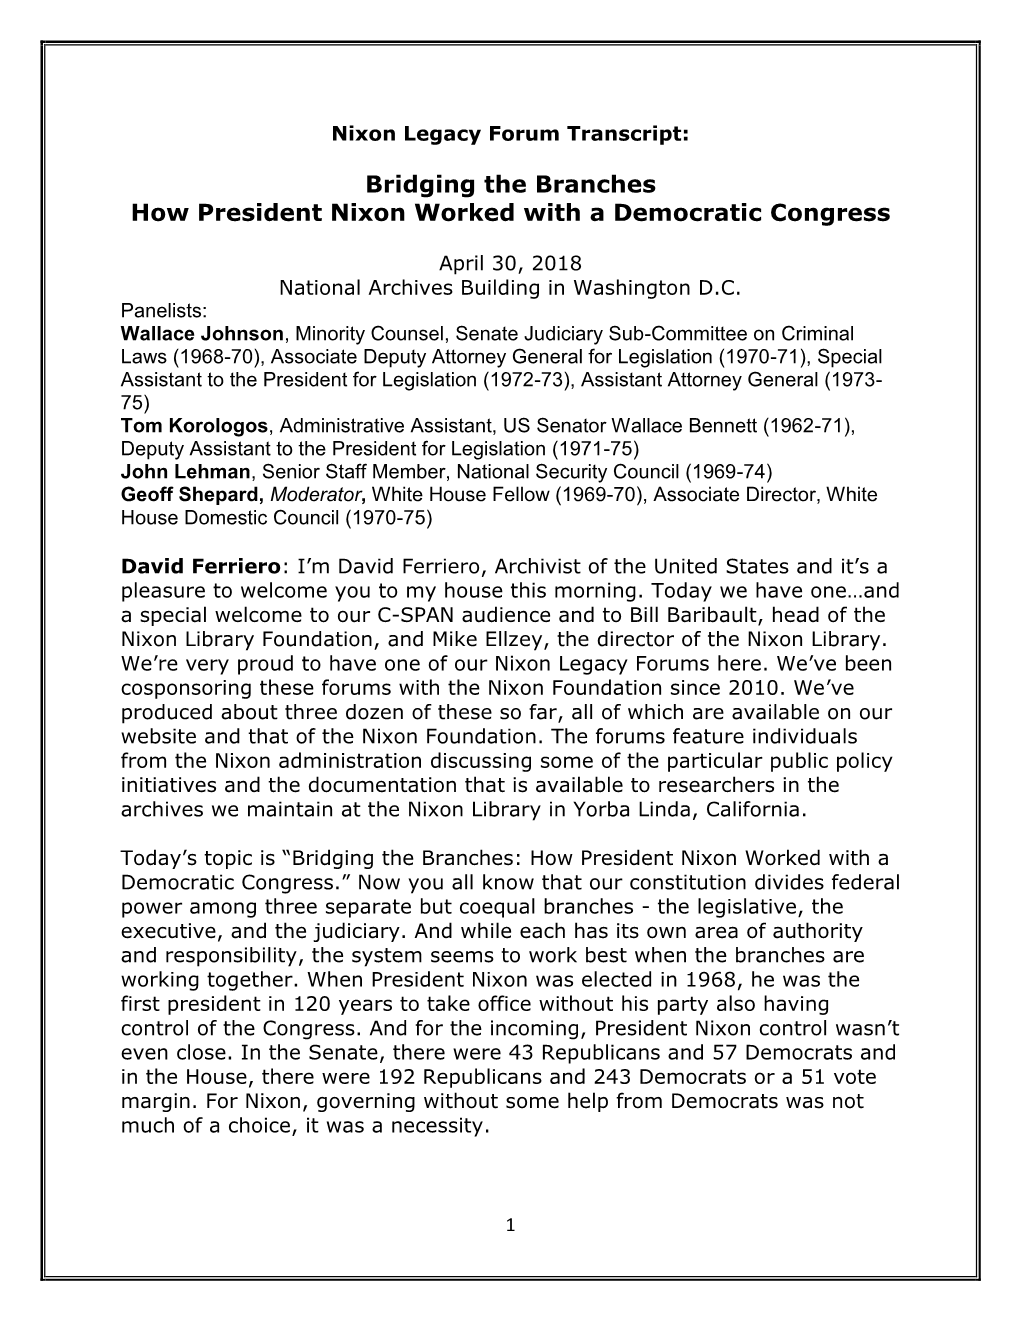 Bridging the Branches How President Nixon Worked with a Democratic Congress